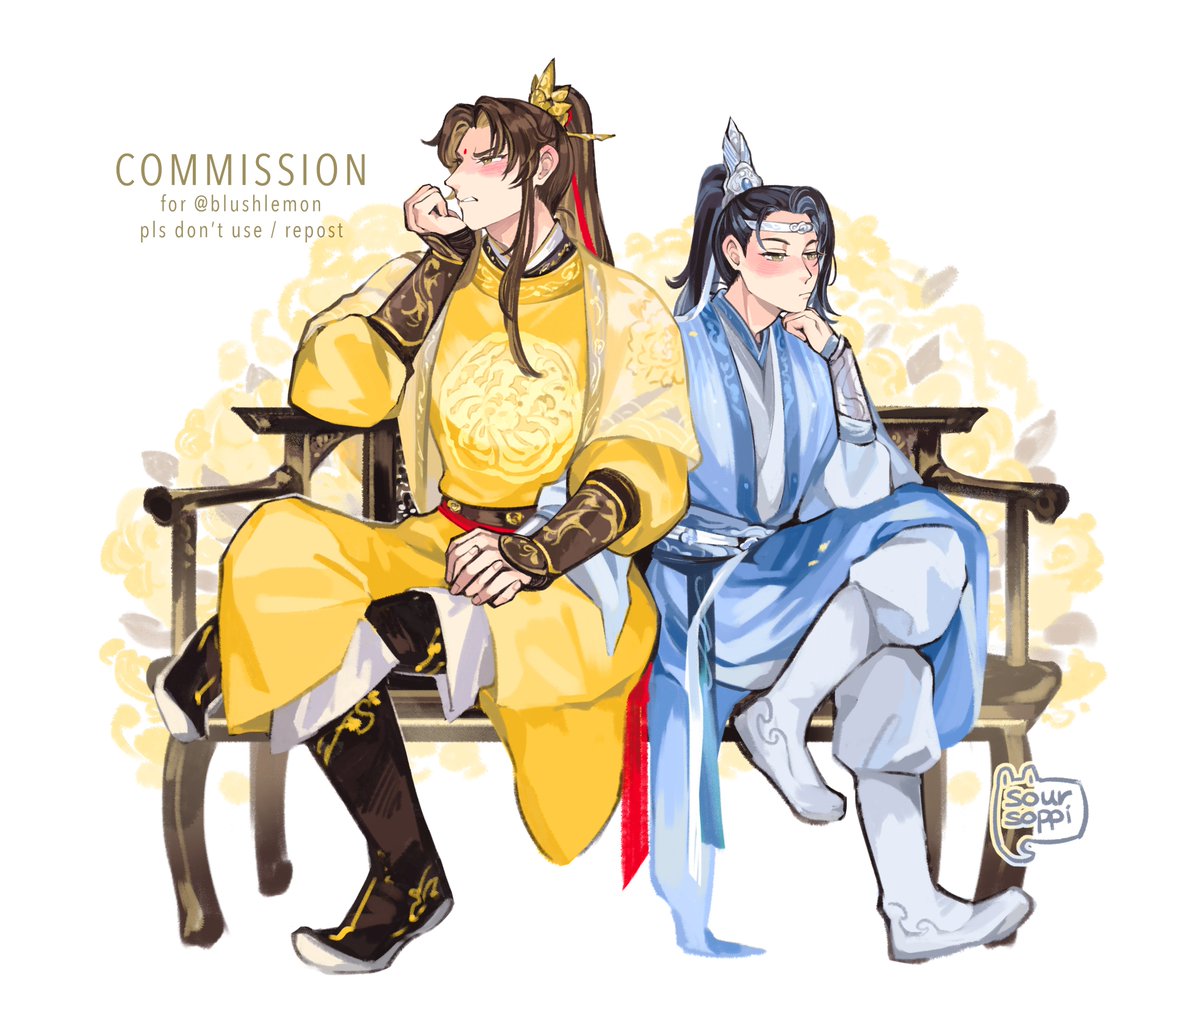 multiple boys 2boys chinese clothes sitting long sleeves robe boots  illustration images